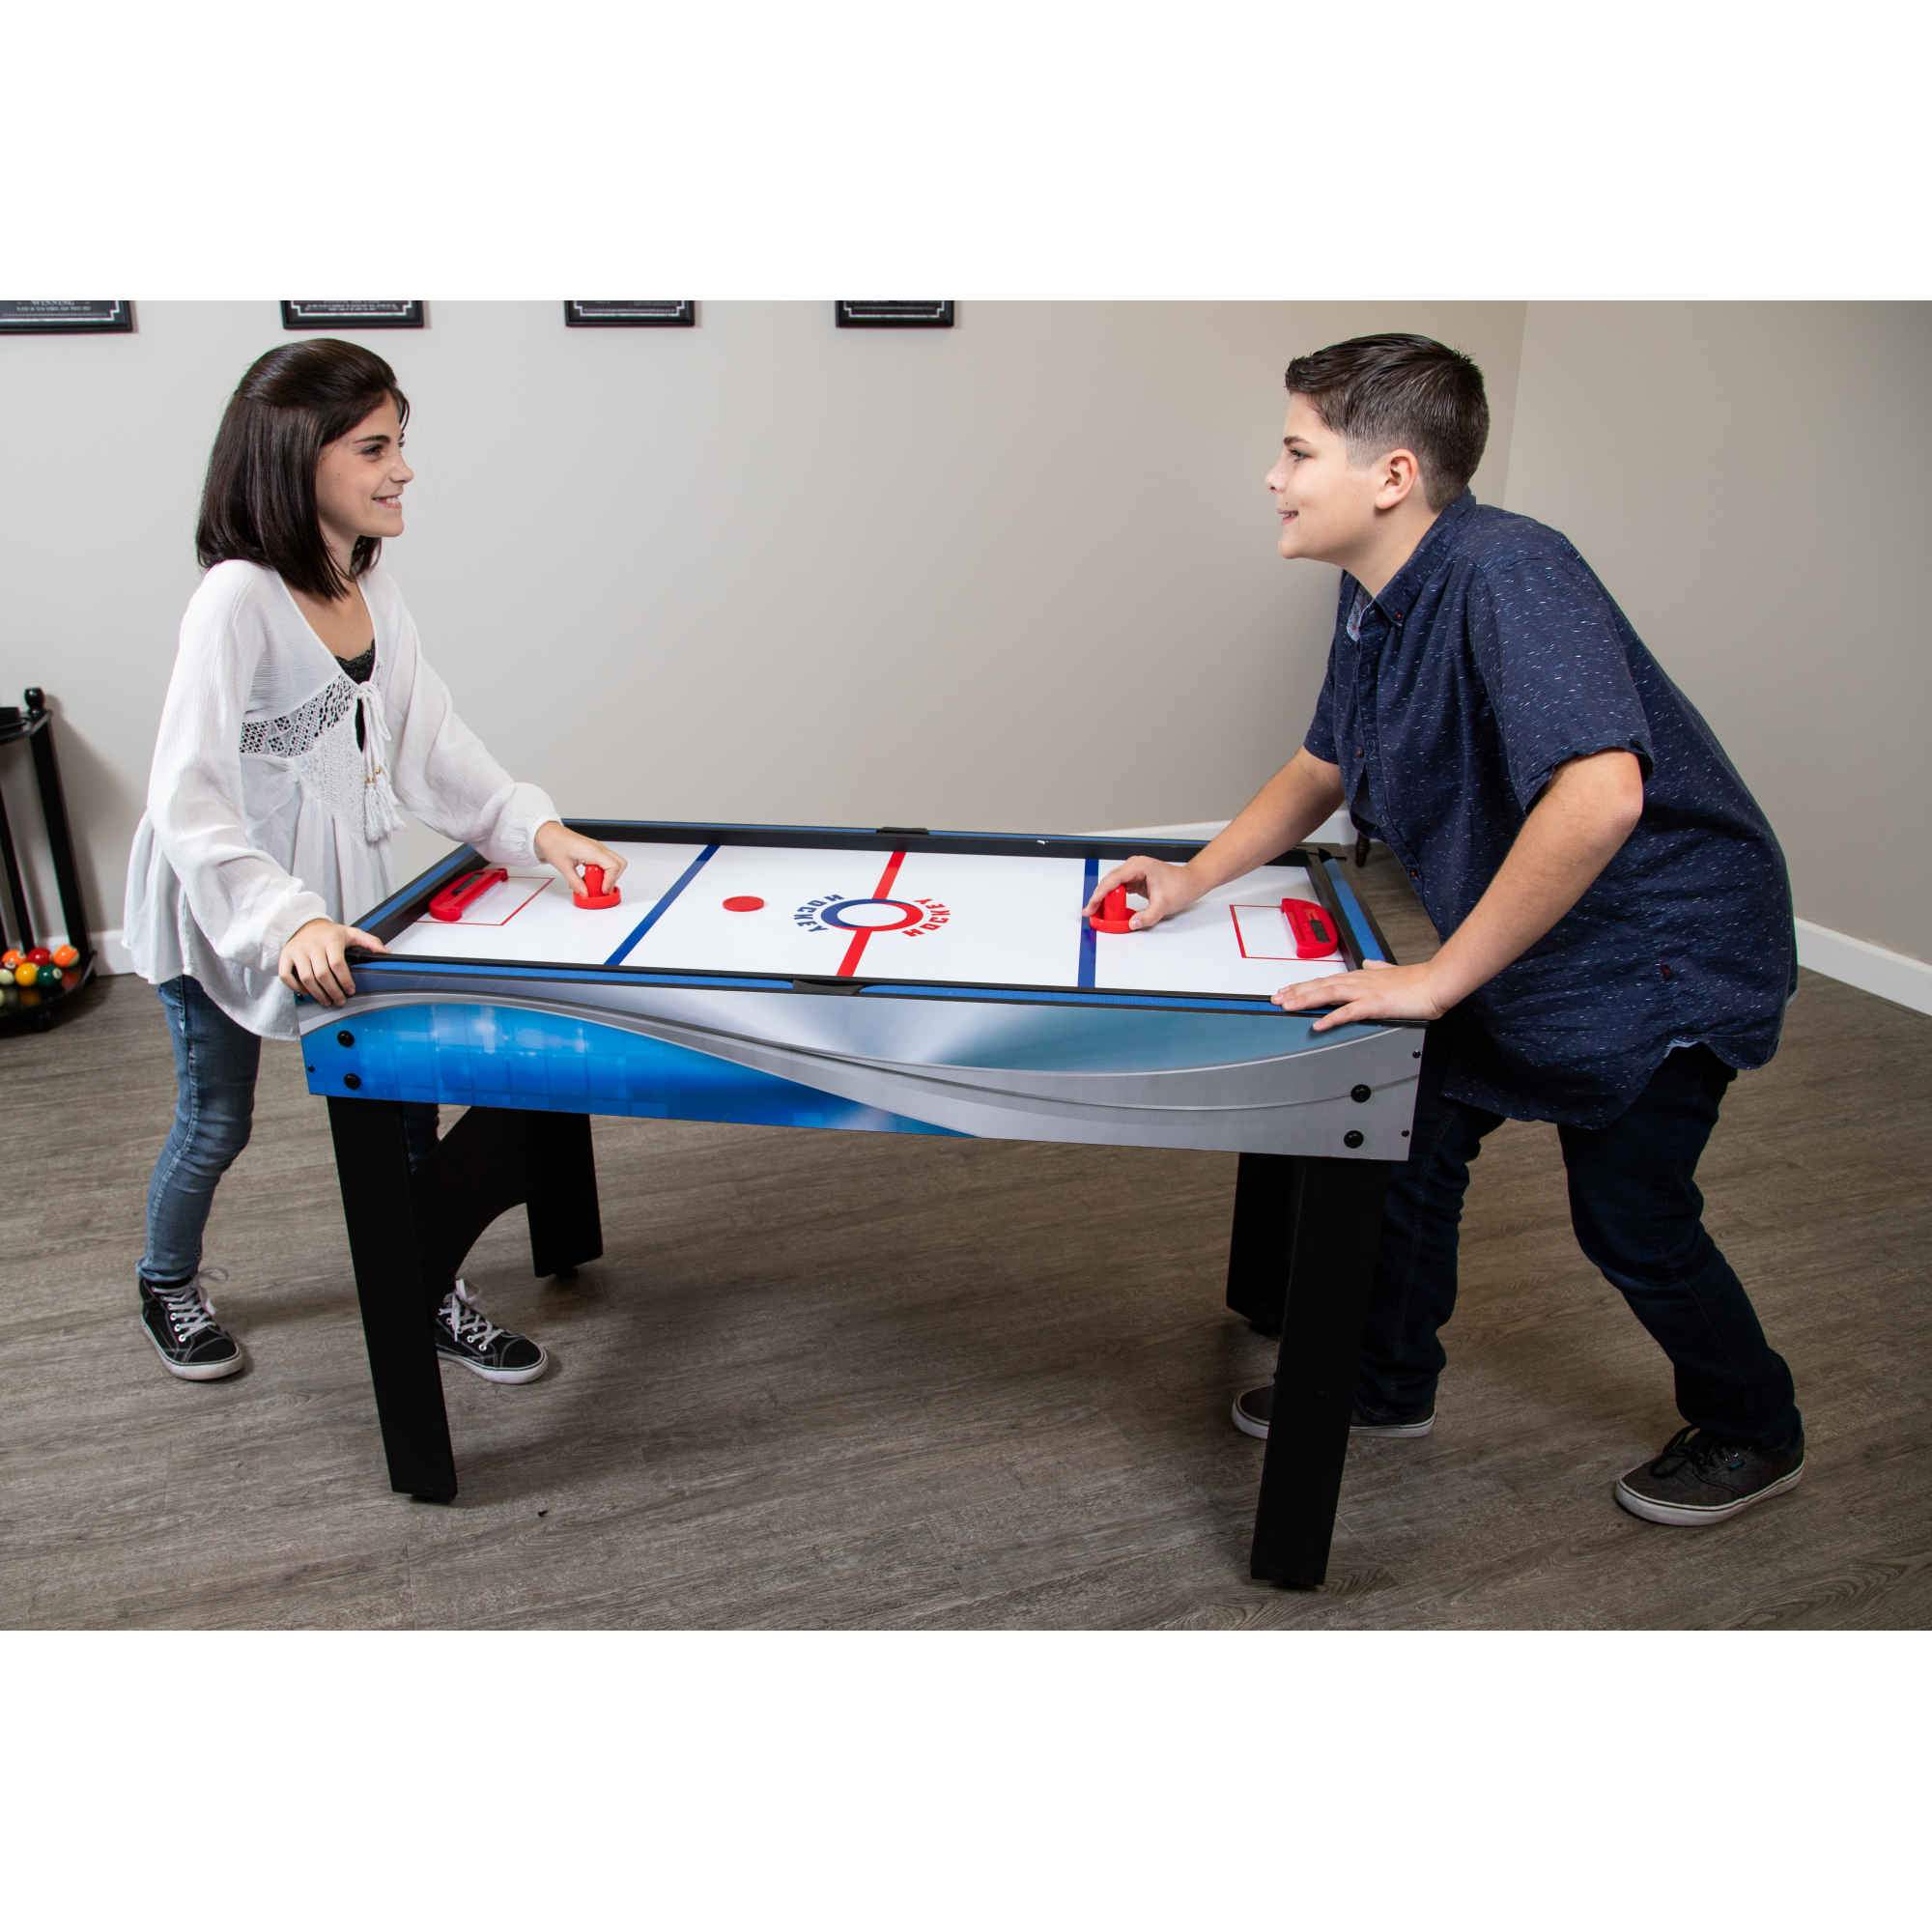 Multi Game Tables – Game Room Shop